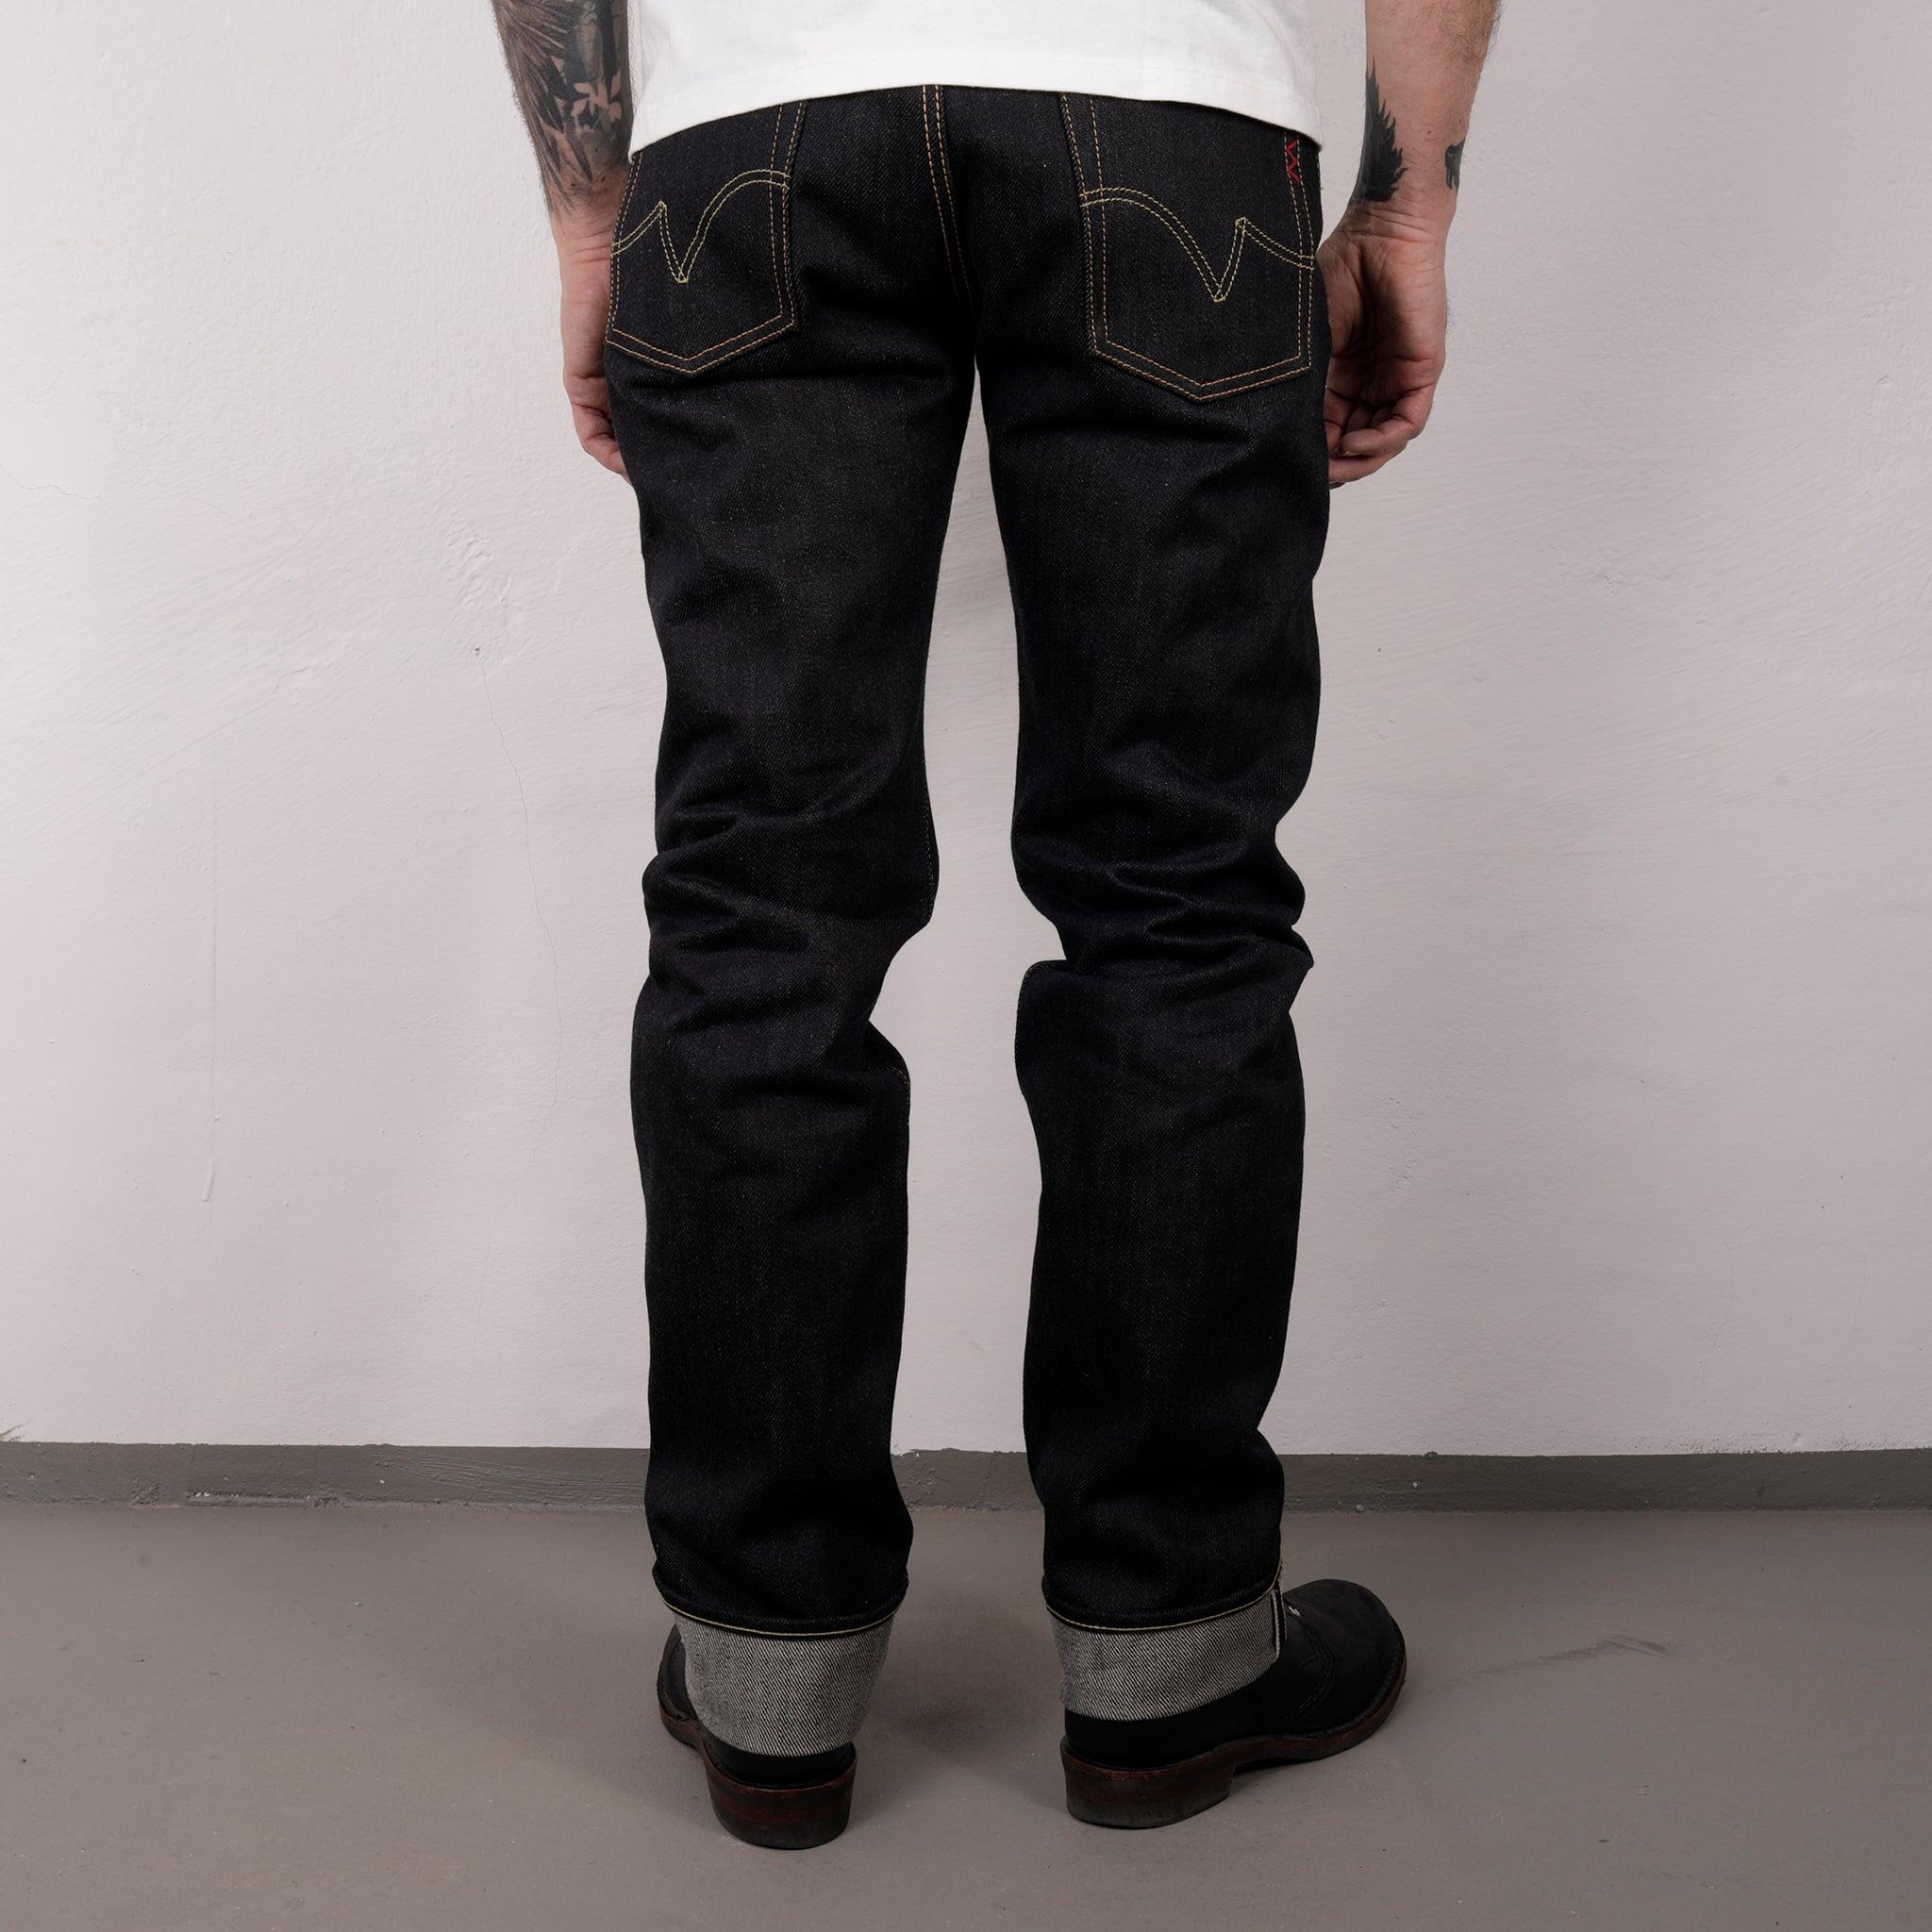 Image showing the IH-666-XHS - 25oz Slim Straight Cut Jeans Indigo which is a Jeans described by the following info 666, Bottoms, Iron Heart, Jeans, Released, Straight and sold on the IRON HEART GERMANY online store